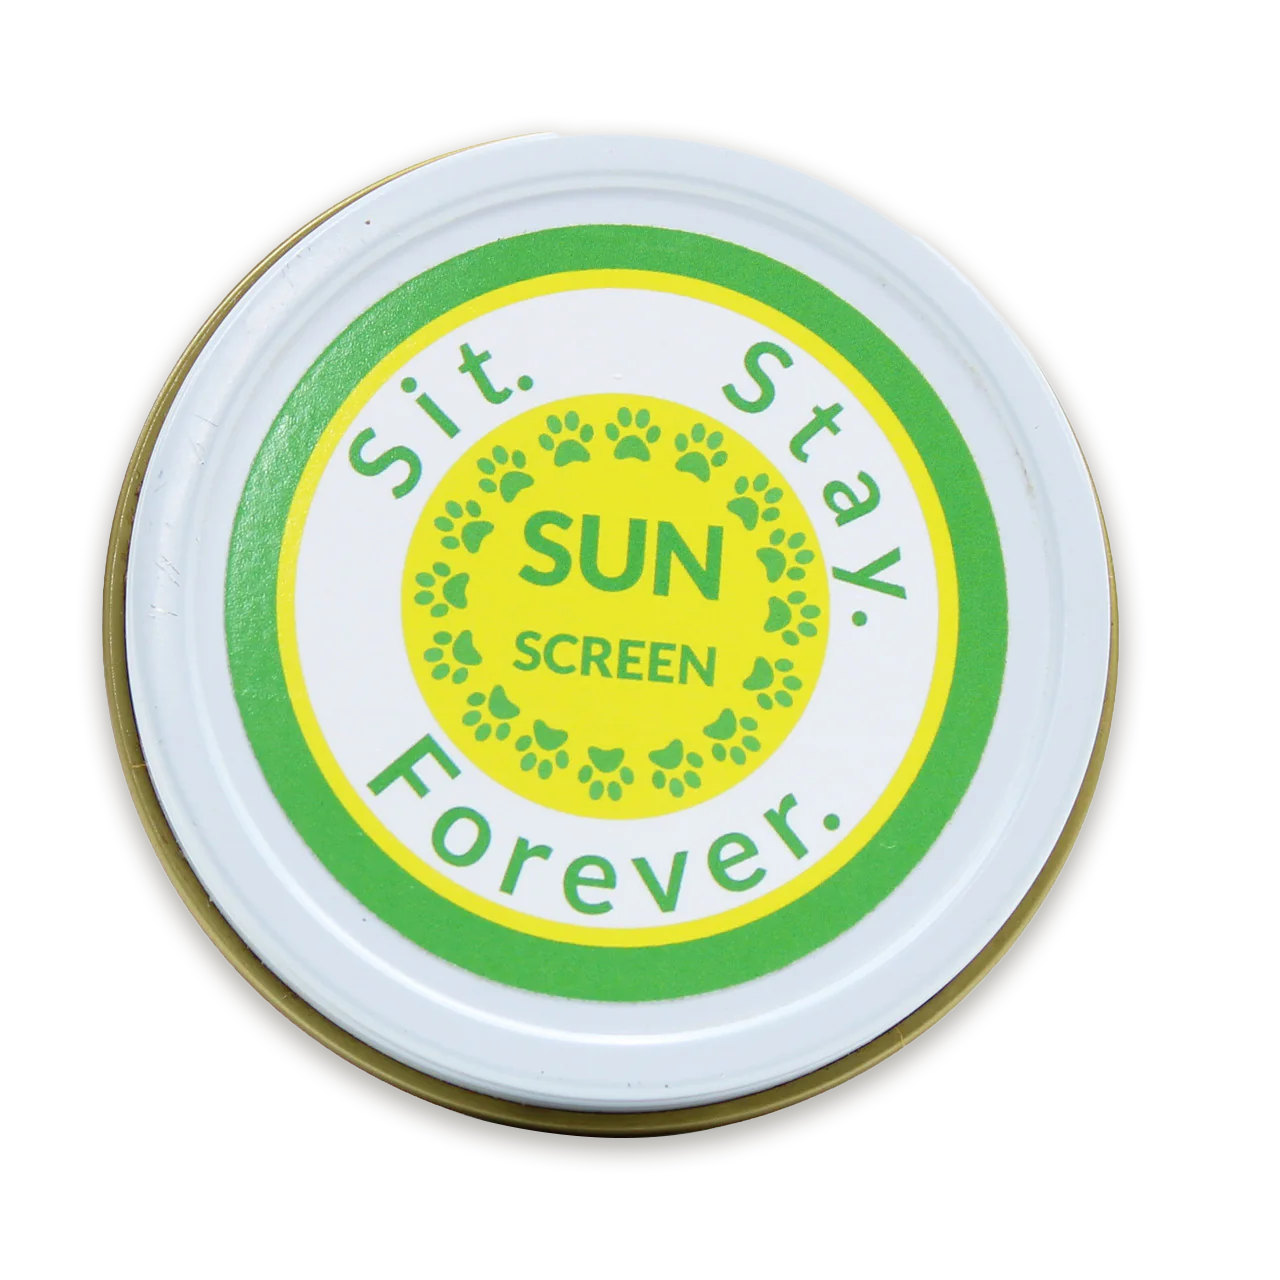 A round tin of sunscreen with a green and yellow label reading Sit.Stay.Forever. SUN SCREEN.